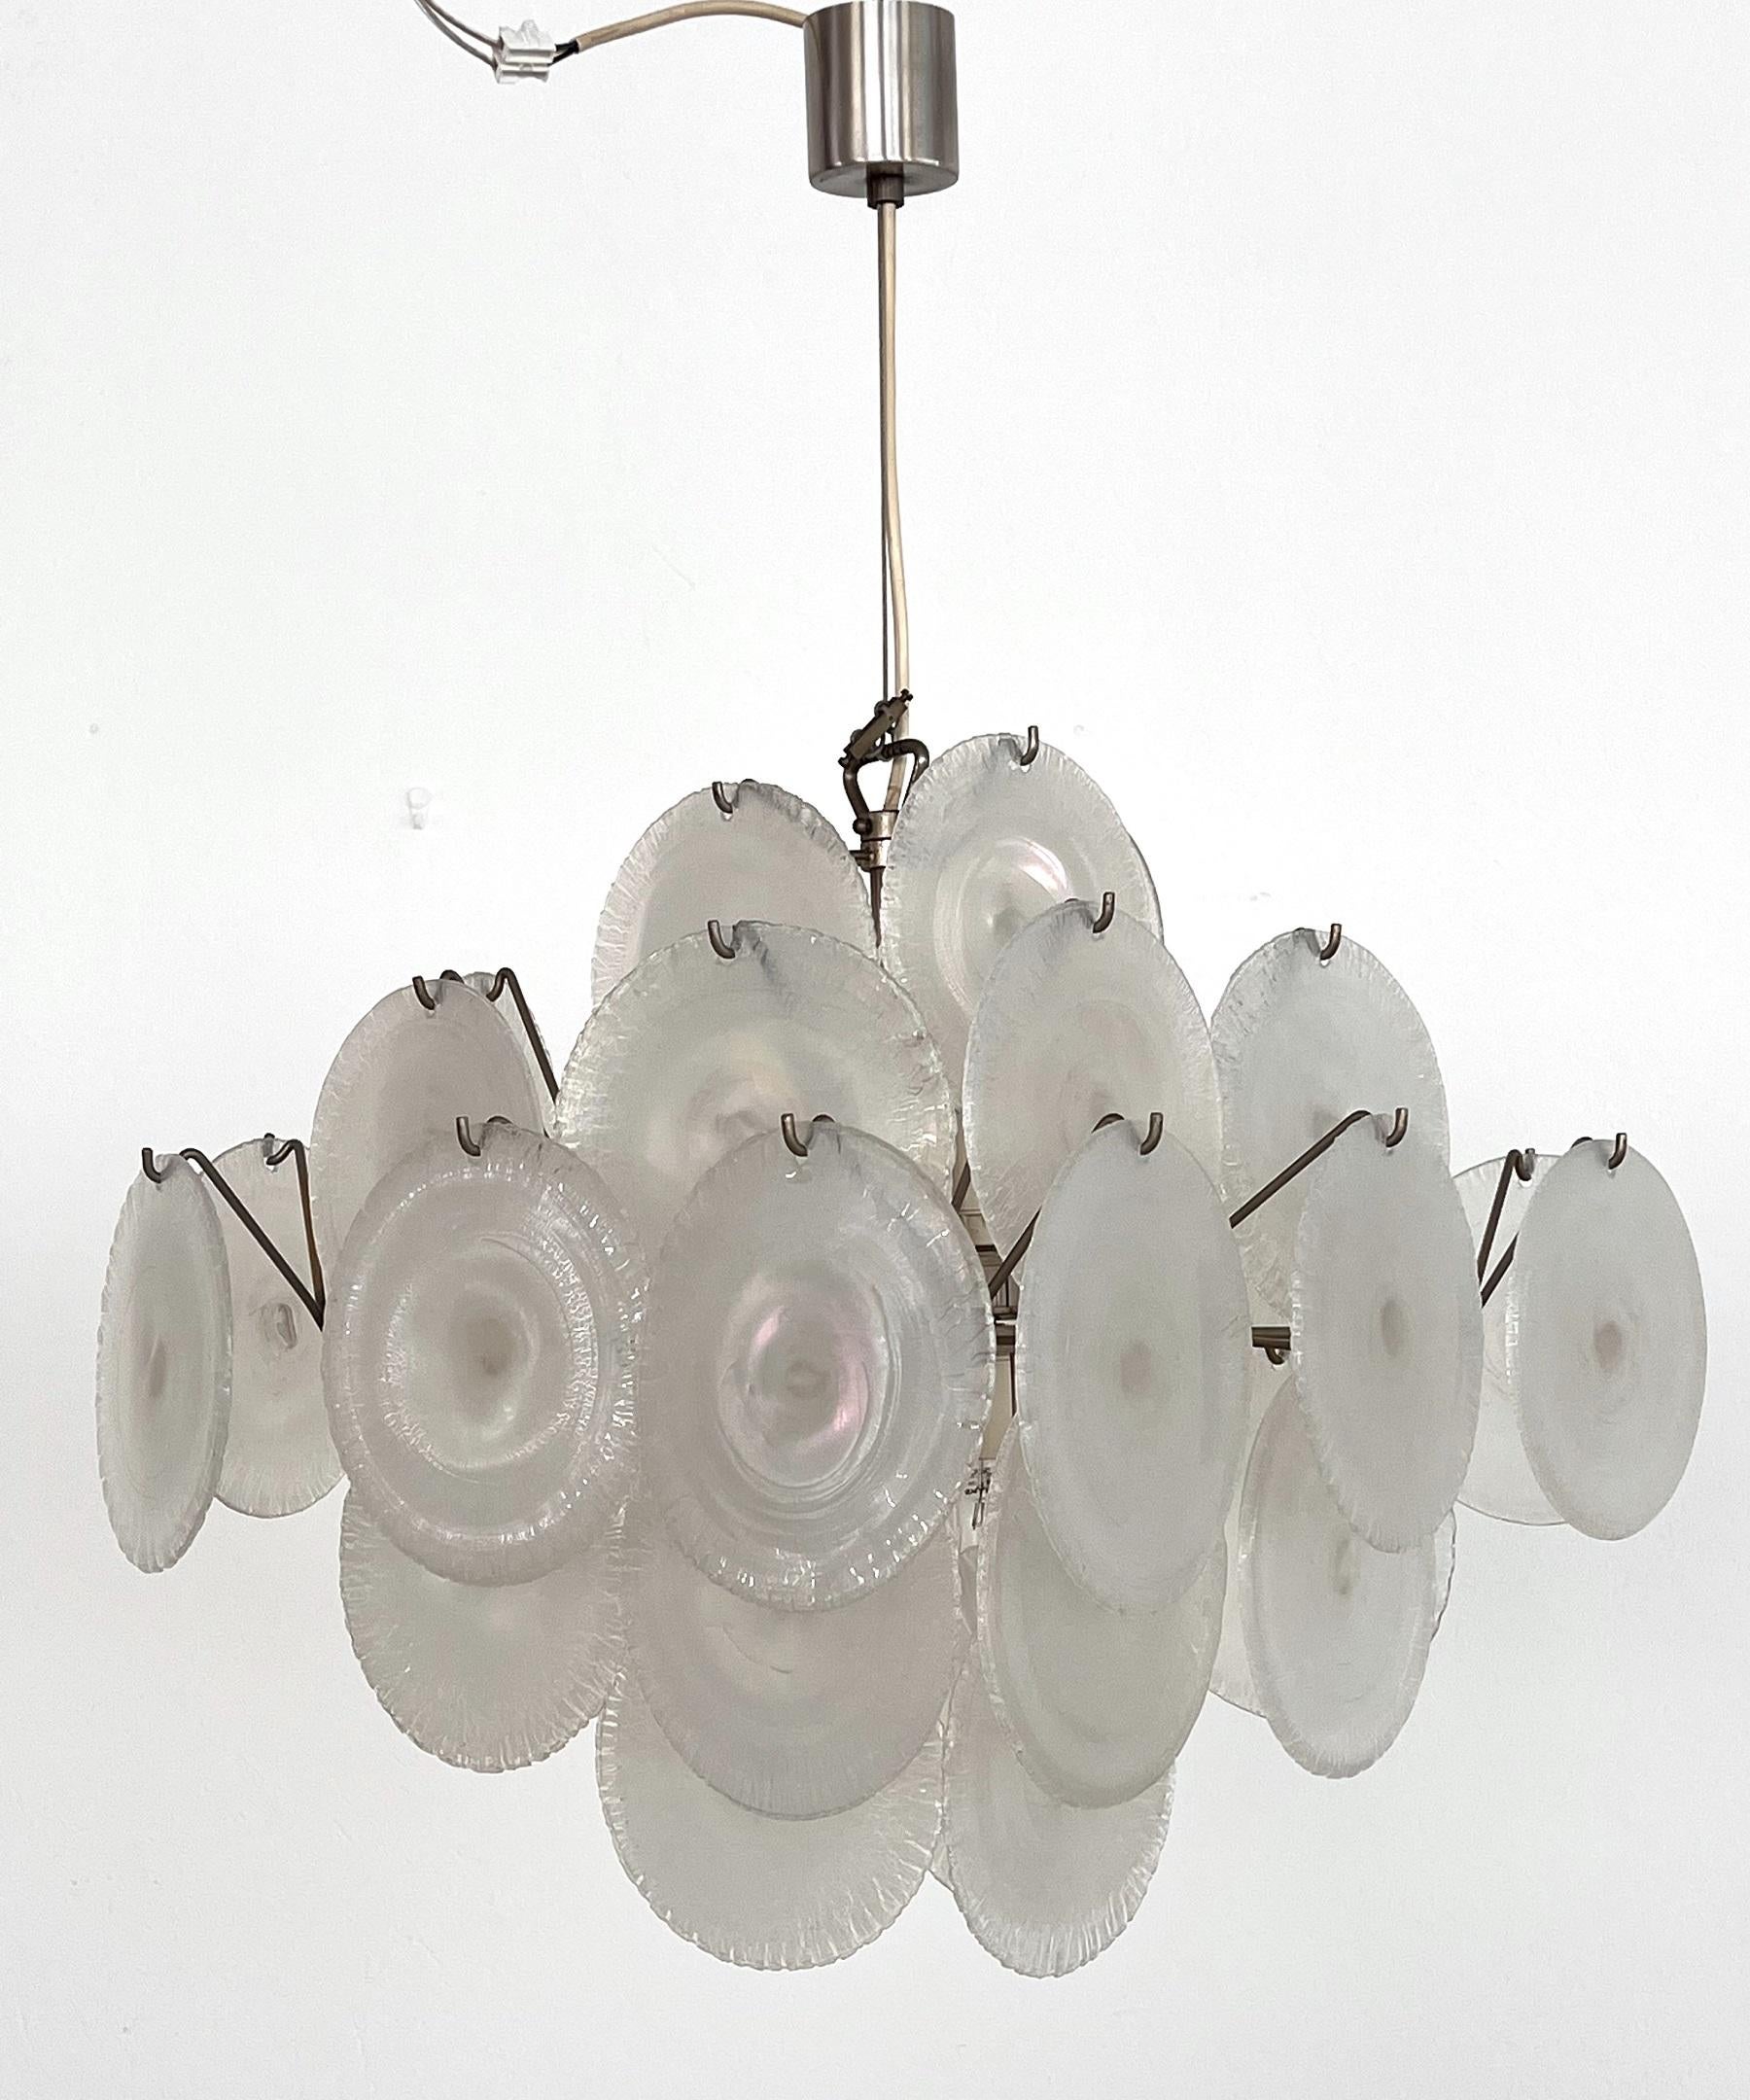 Late 20th Century Italian Midcentury Murano Glass and Nickel Mazzega Chandelier by Carlo Nason 70s For Sale